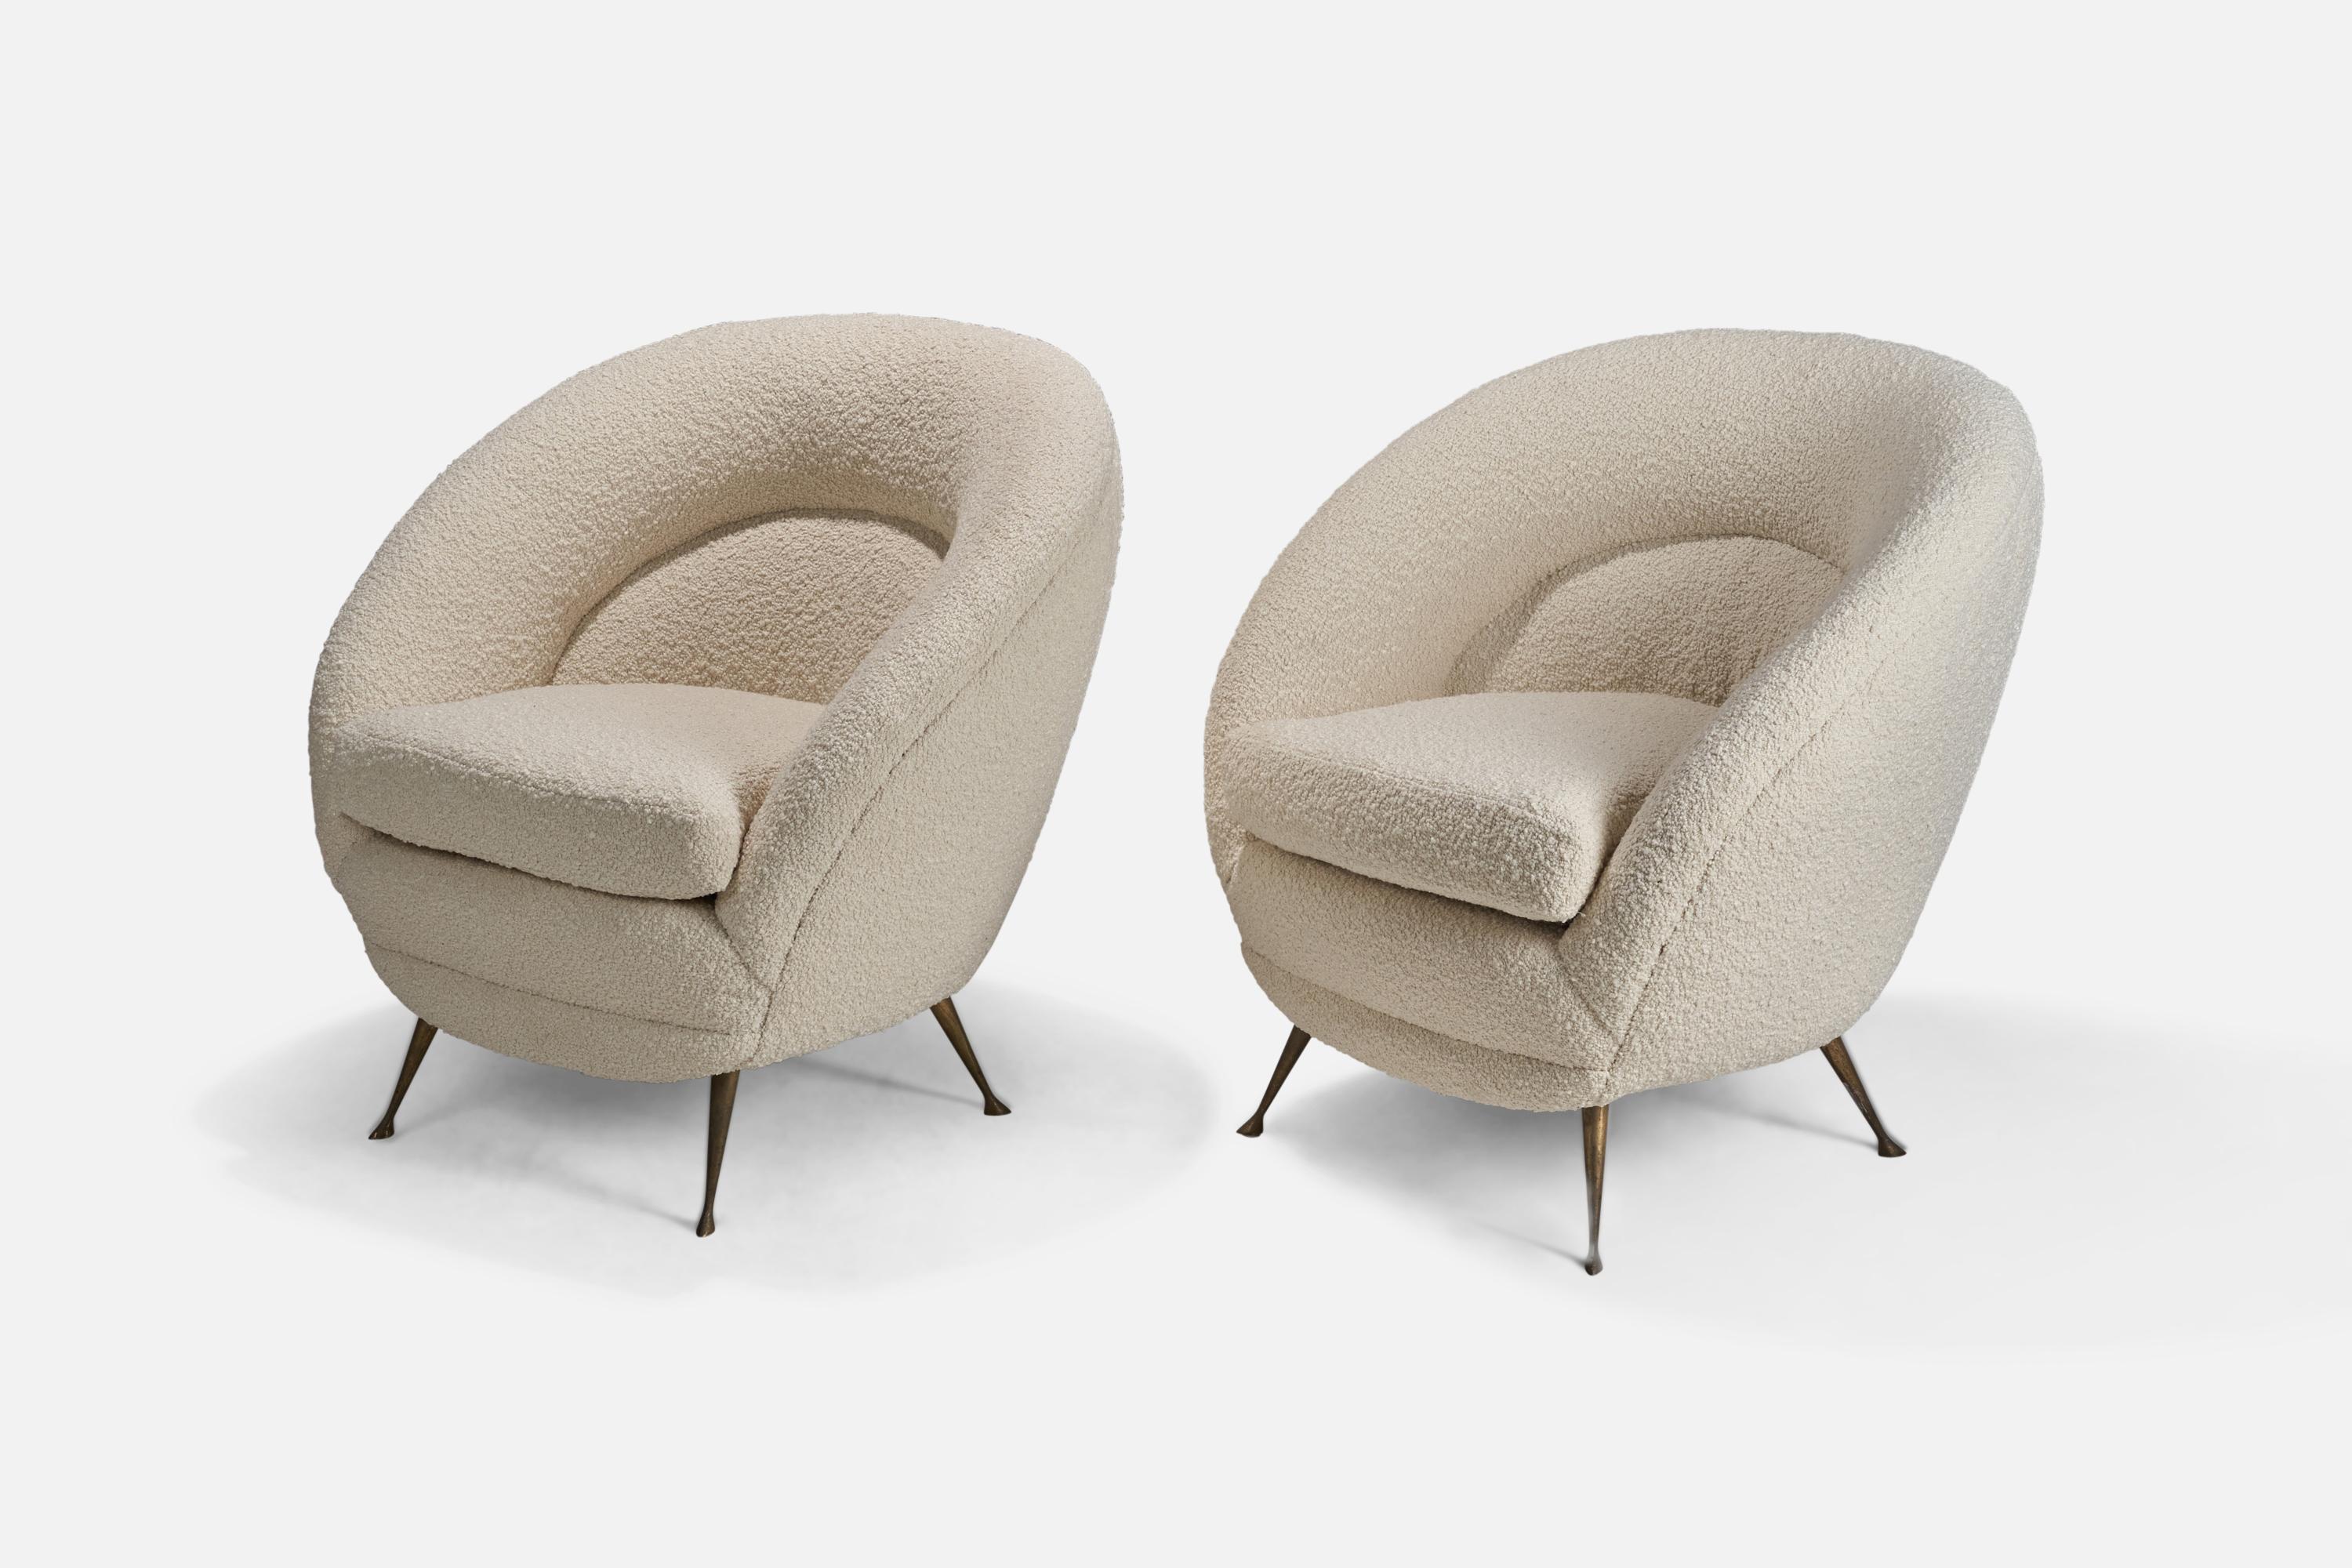 A pair of white bouclé fabric and brass lounge chairs designed by Federico Munari and produced by ISA Bergamo, Italy, 1950s.